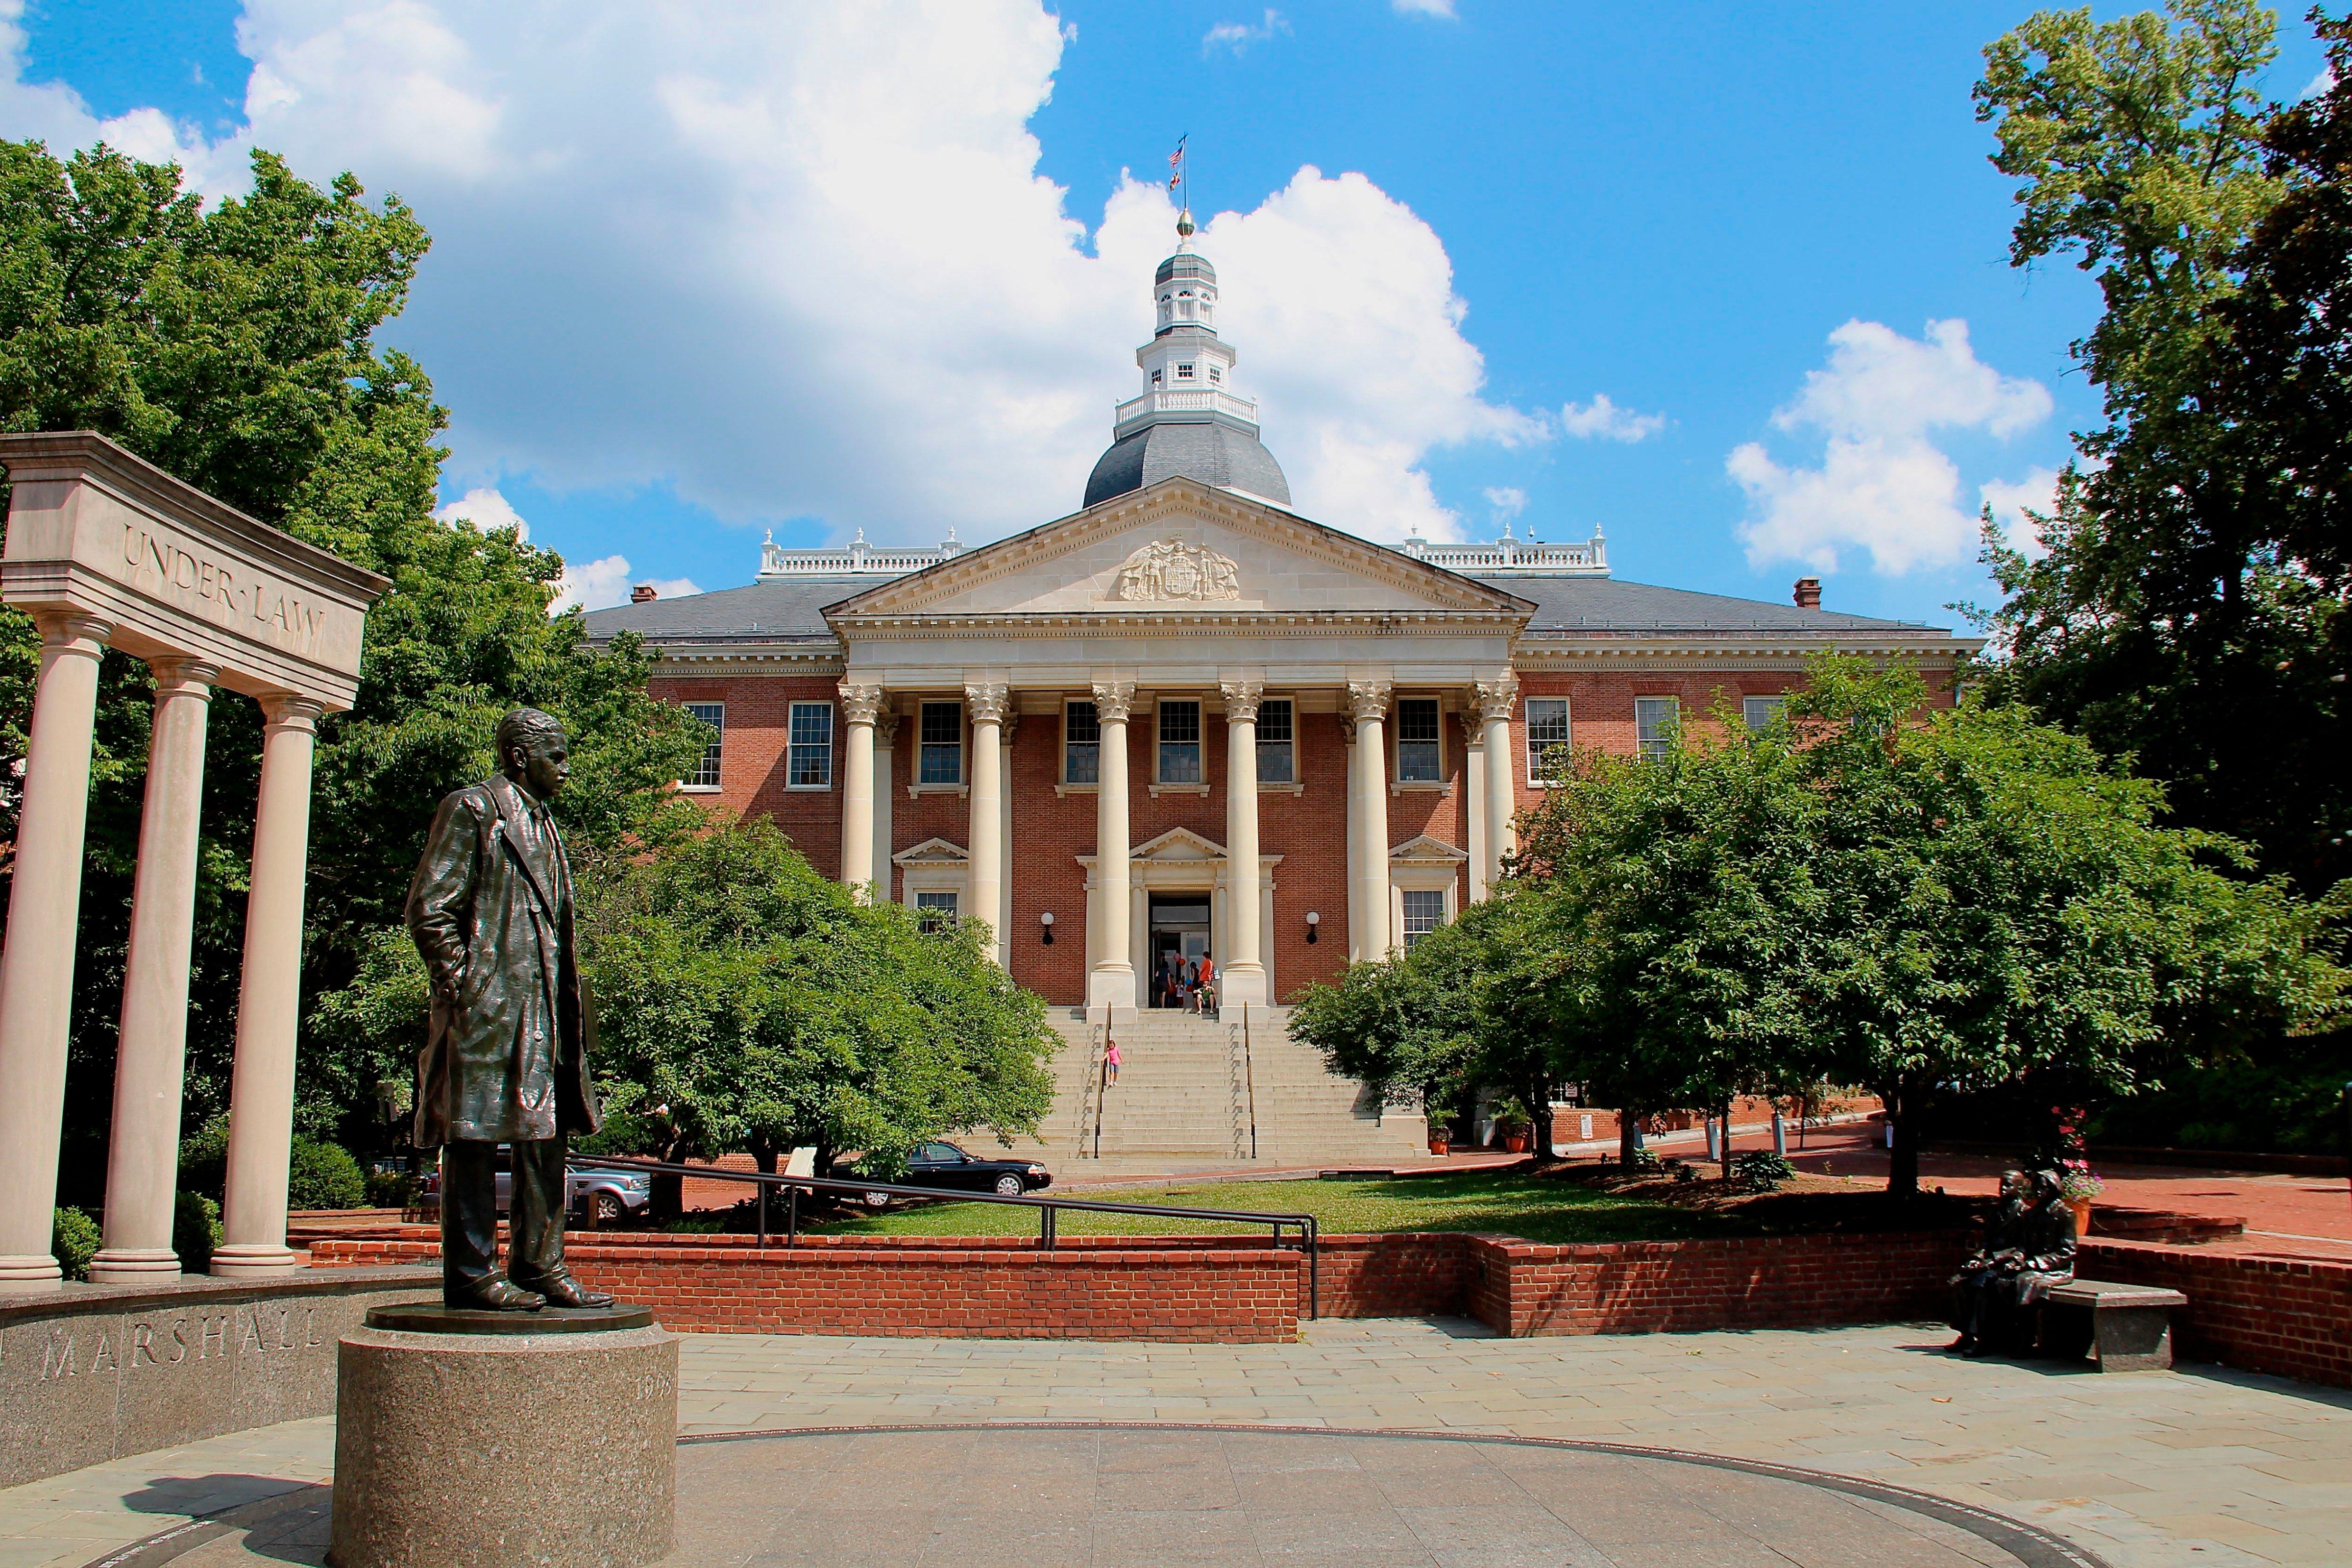 Maryland State House, state capitol building, Annapolis, Maryland, exterior view. (Photo by: Education Images/UIG via Getty Images) (Education Images&mdash;UIG via Getty Images)